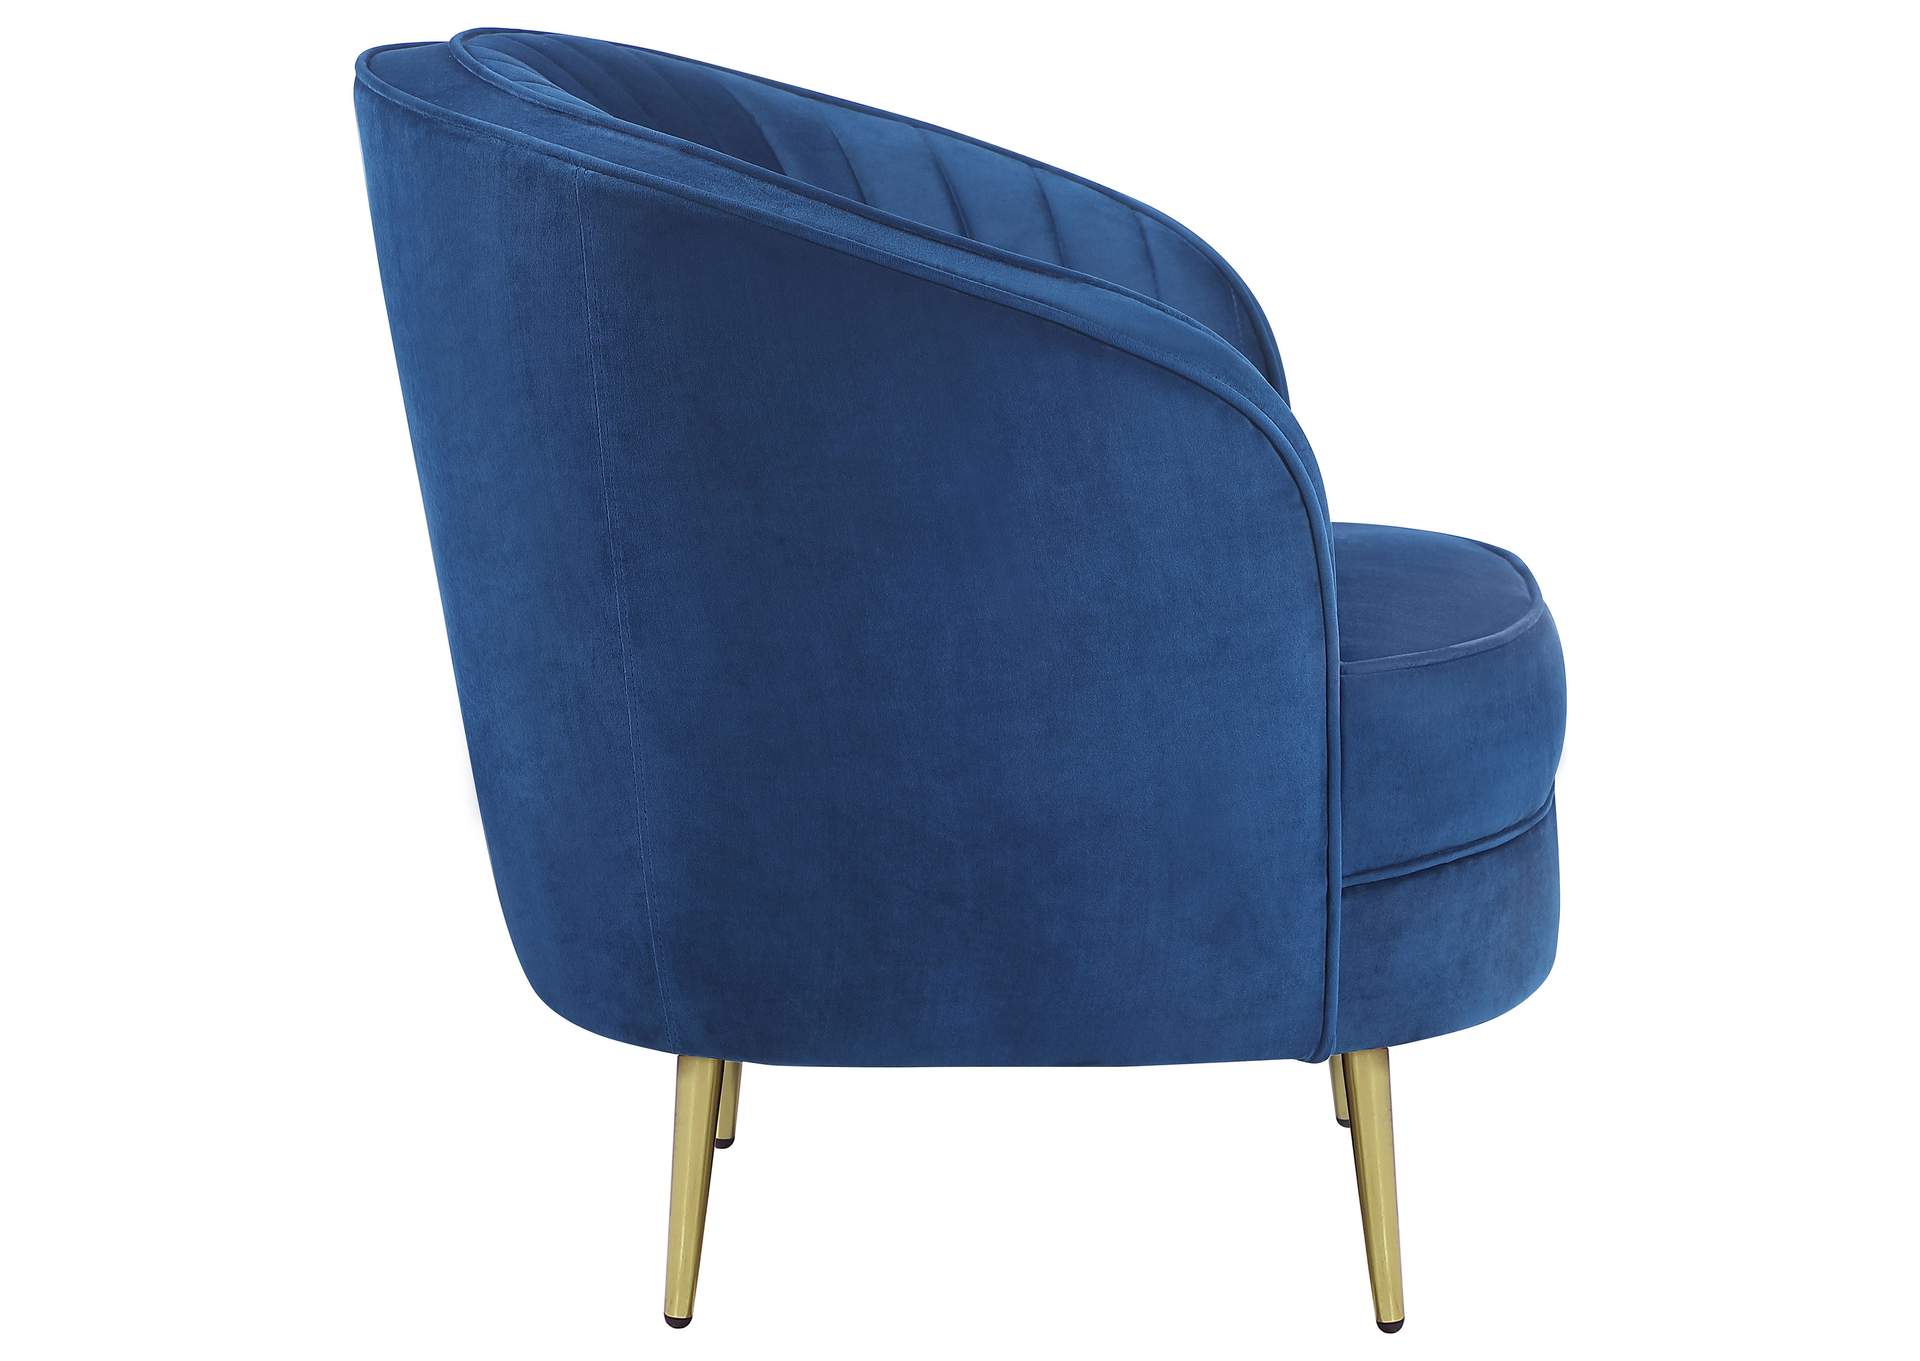 Sophia Upholstered Vertical Channel Tufted Chair Blue,Coaster Furniture